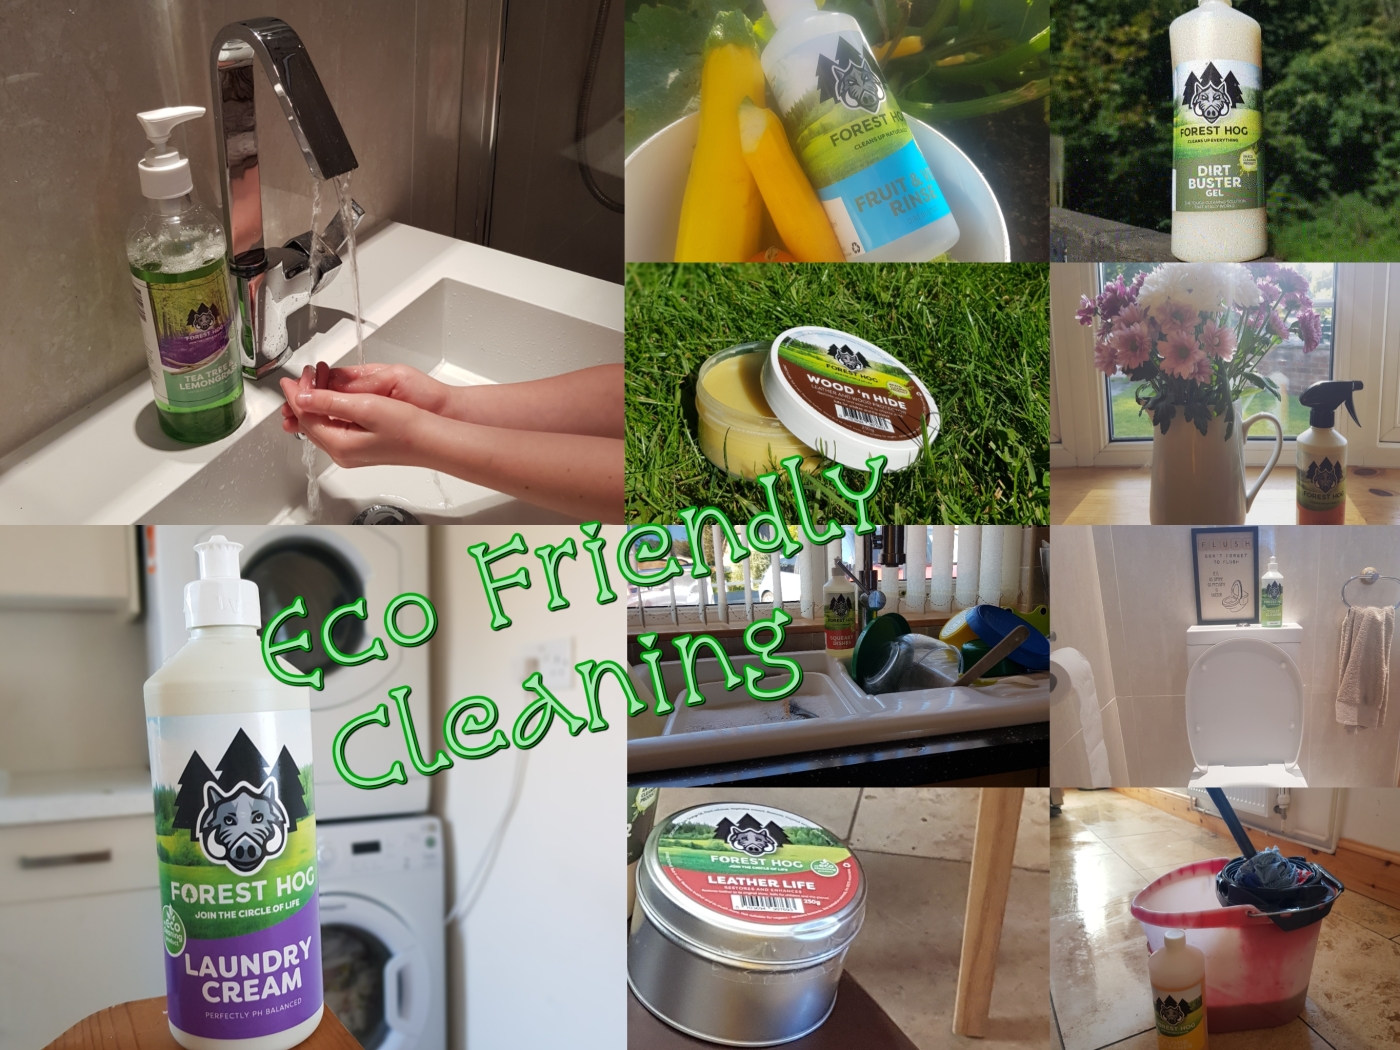 foresthog eco cleaning items